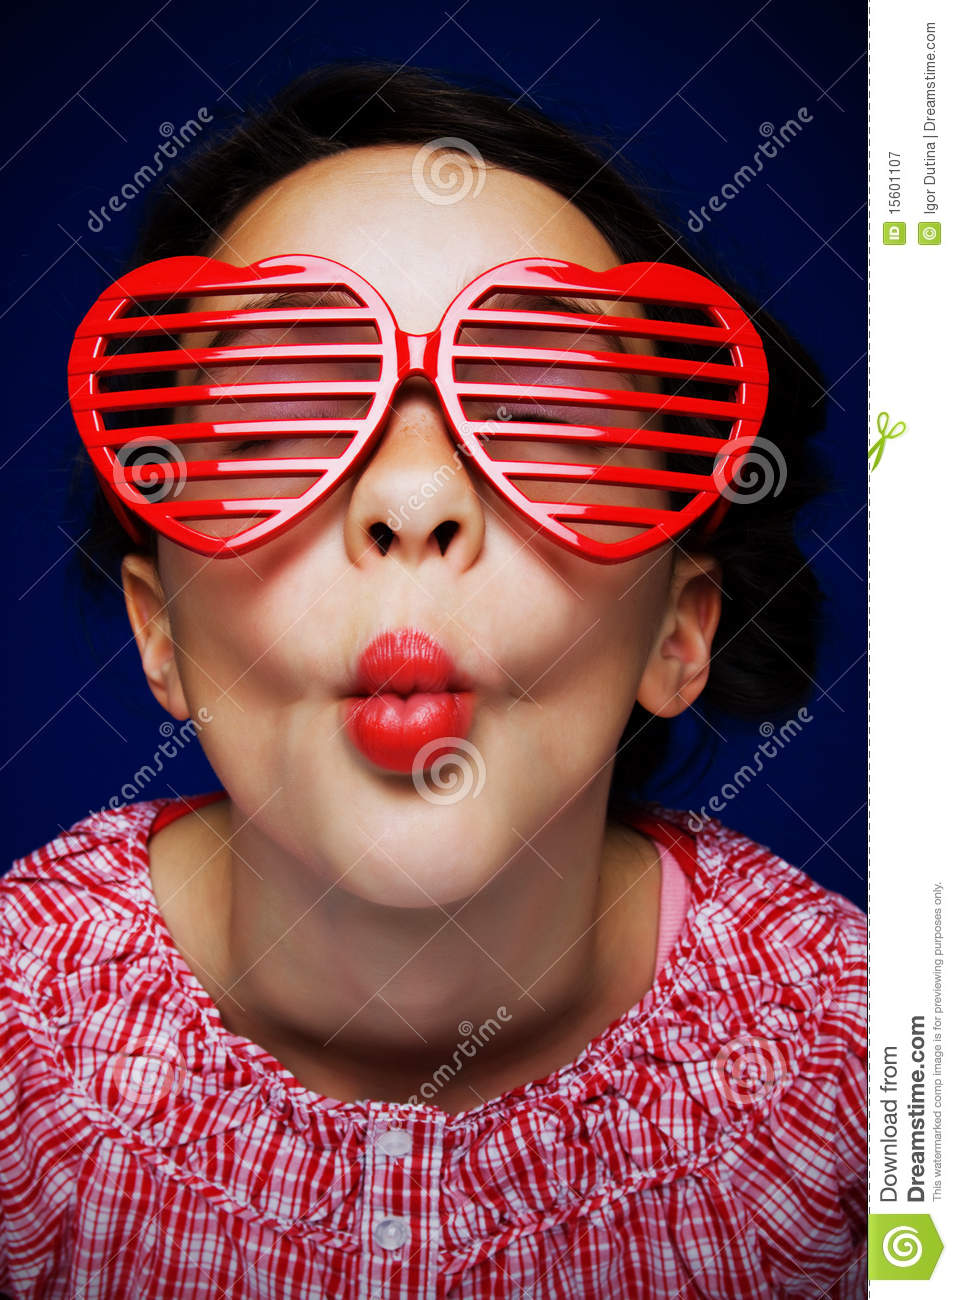 Gril With Shutter Shades Royalty Free Stock Photography   Image    